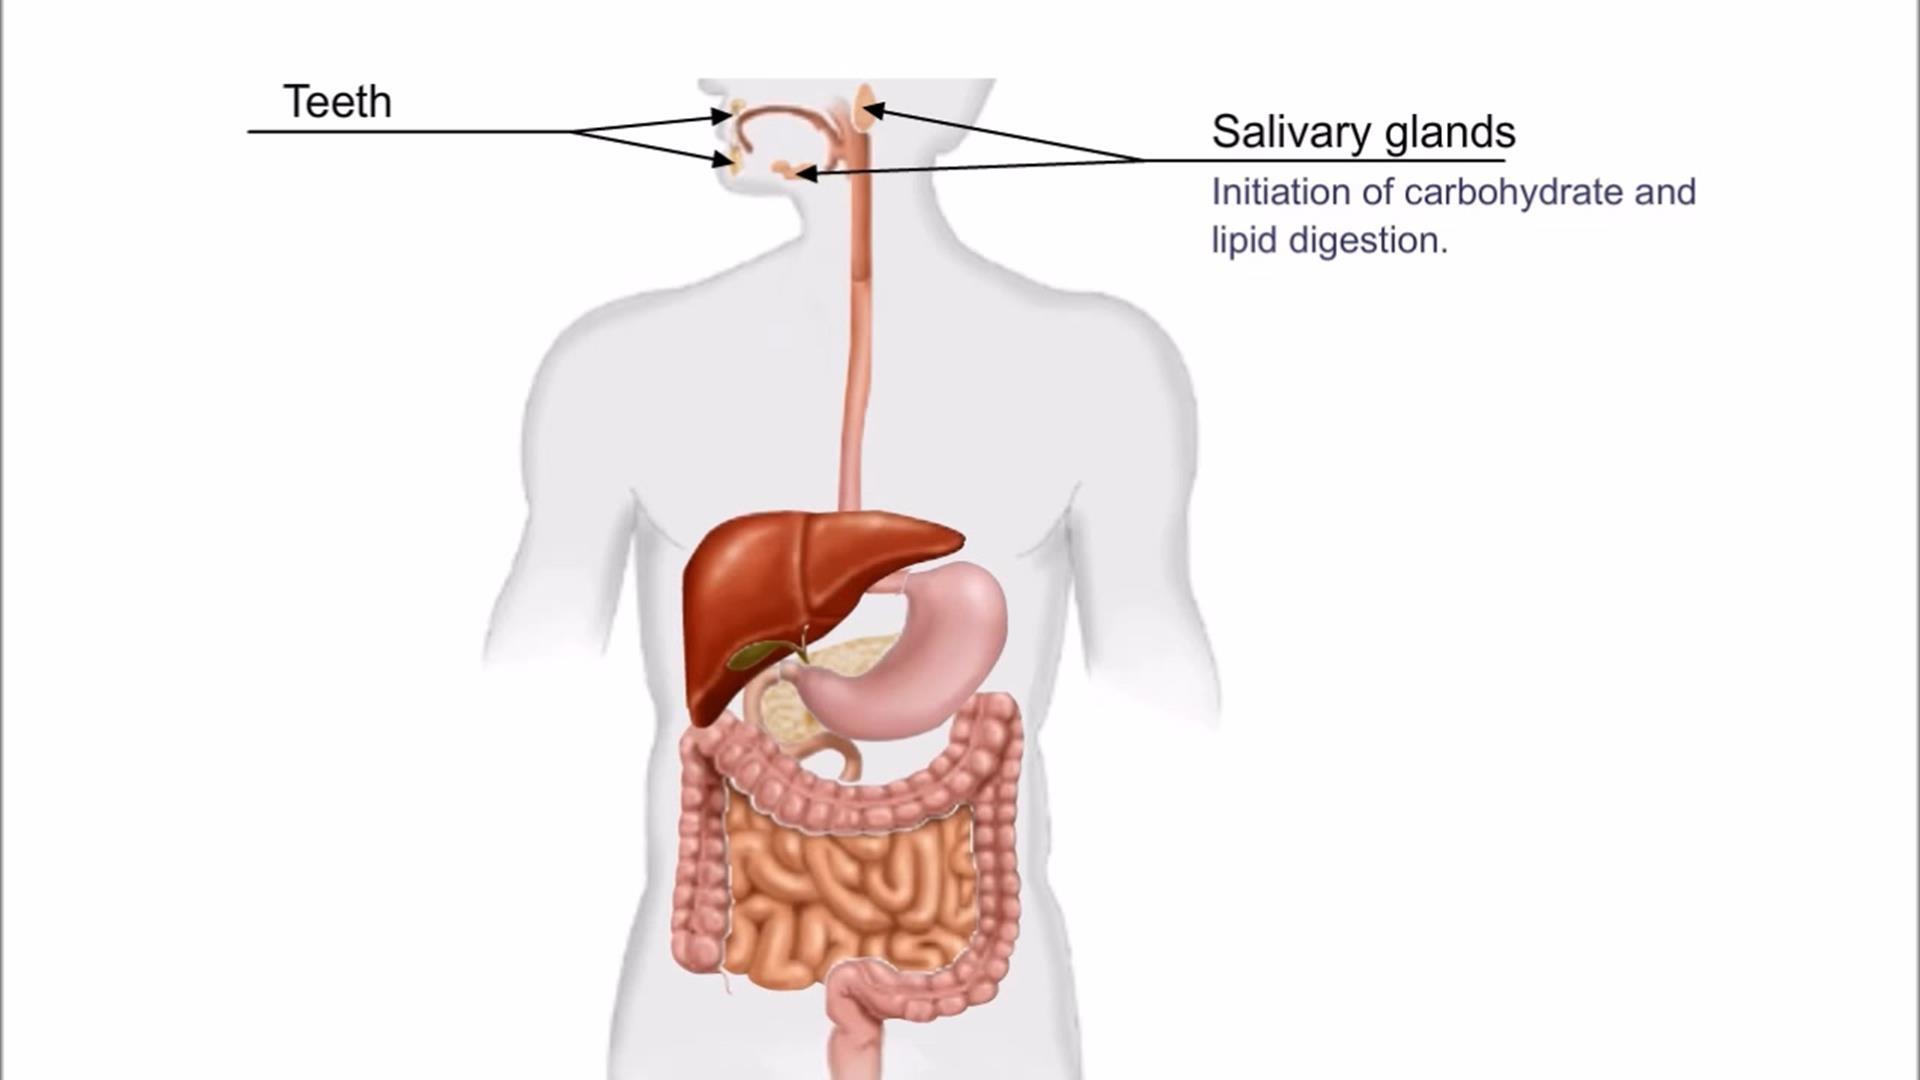 Animation: Overview of the Human Digestive System | Pearson+ Channels